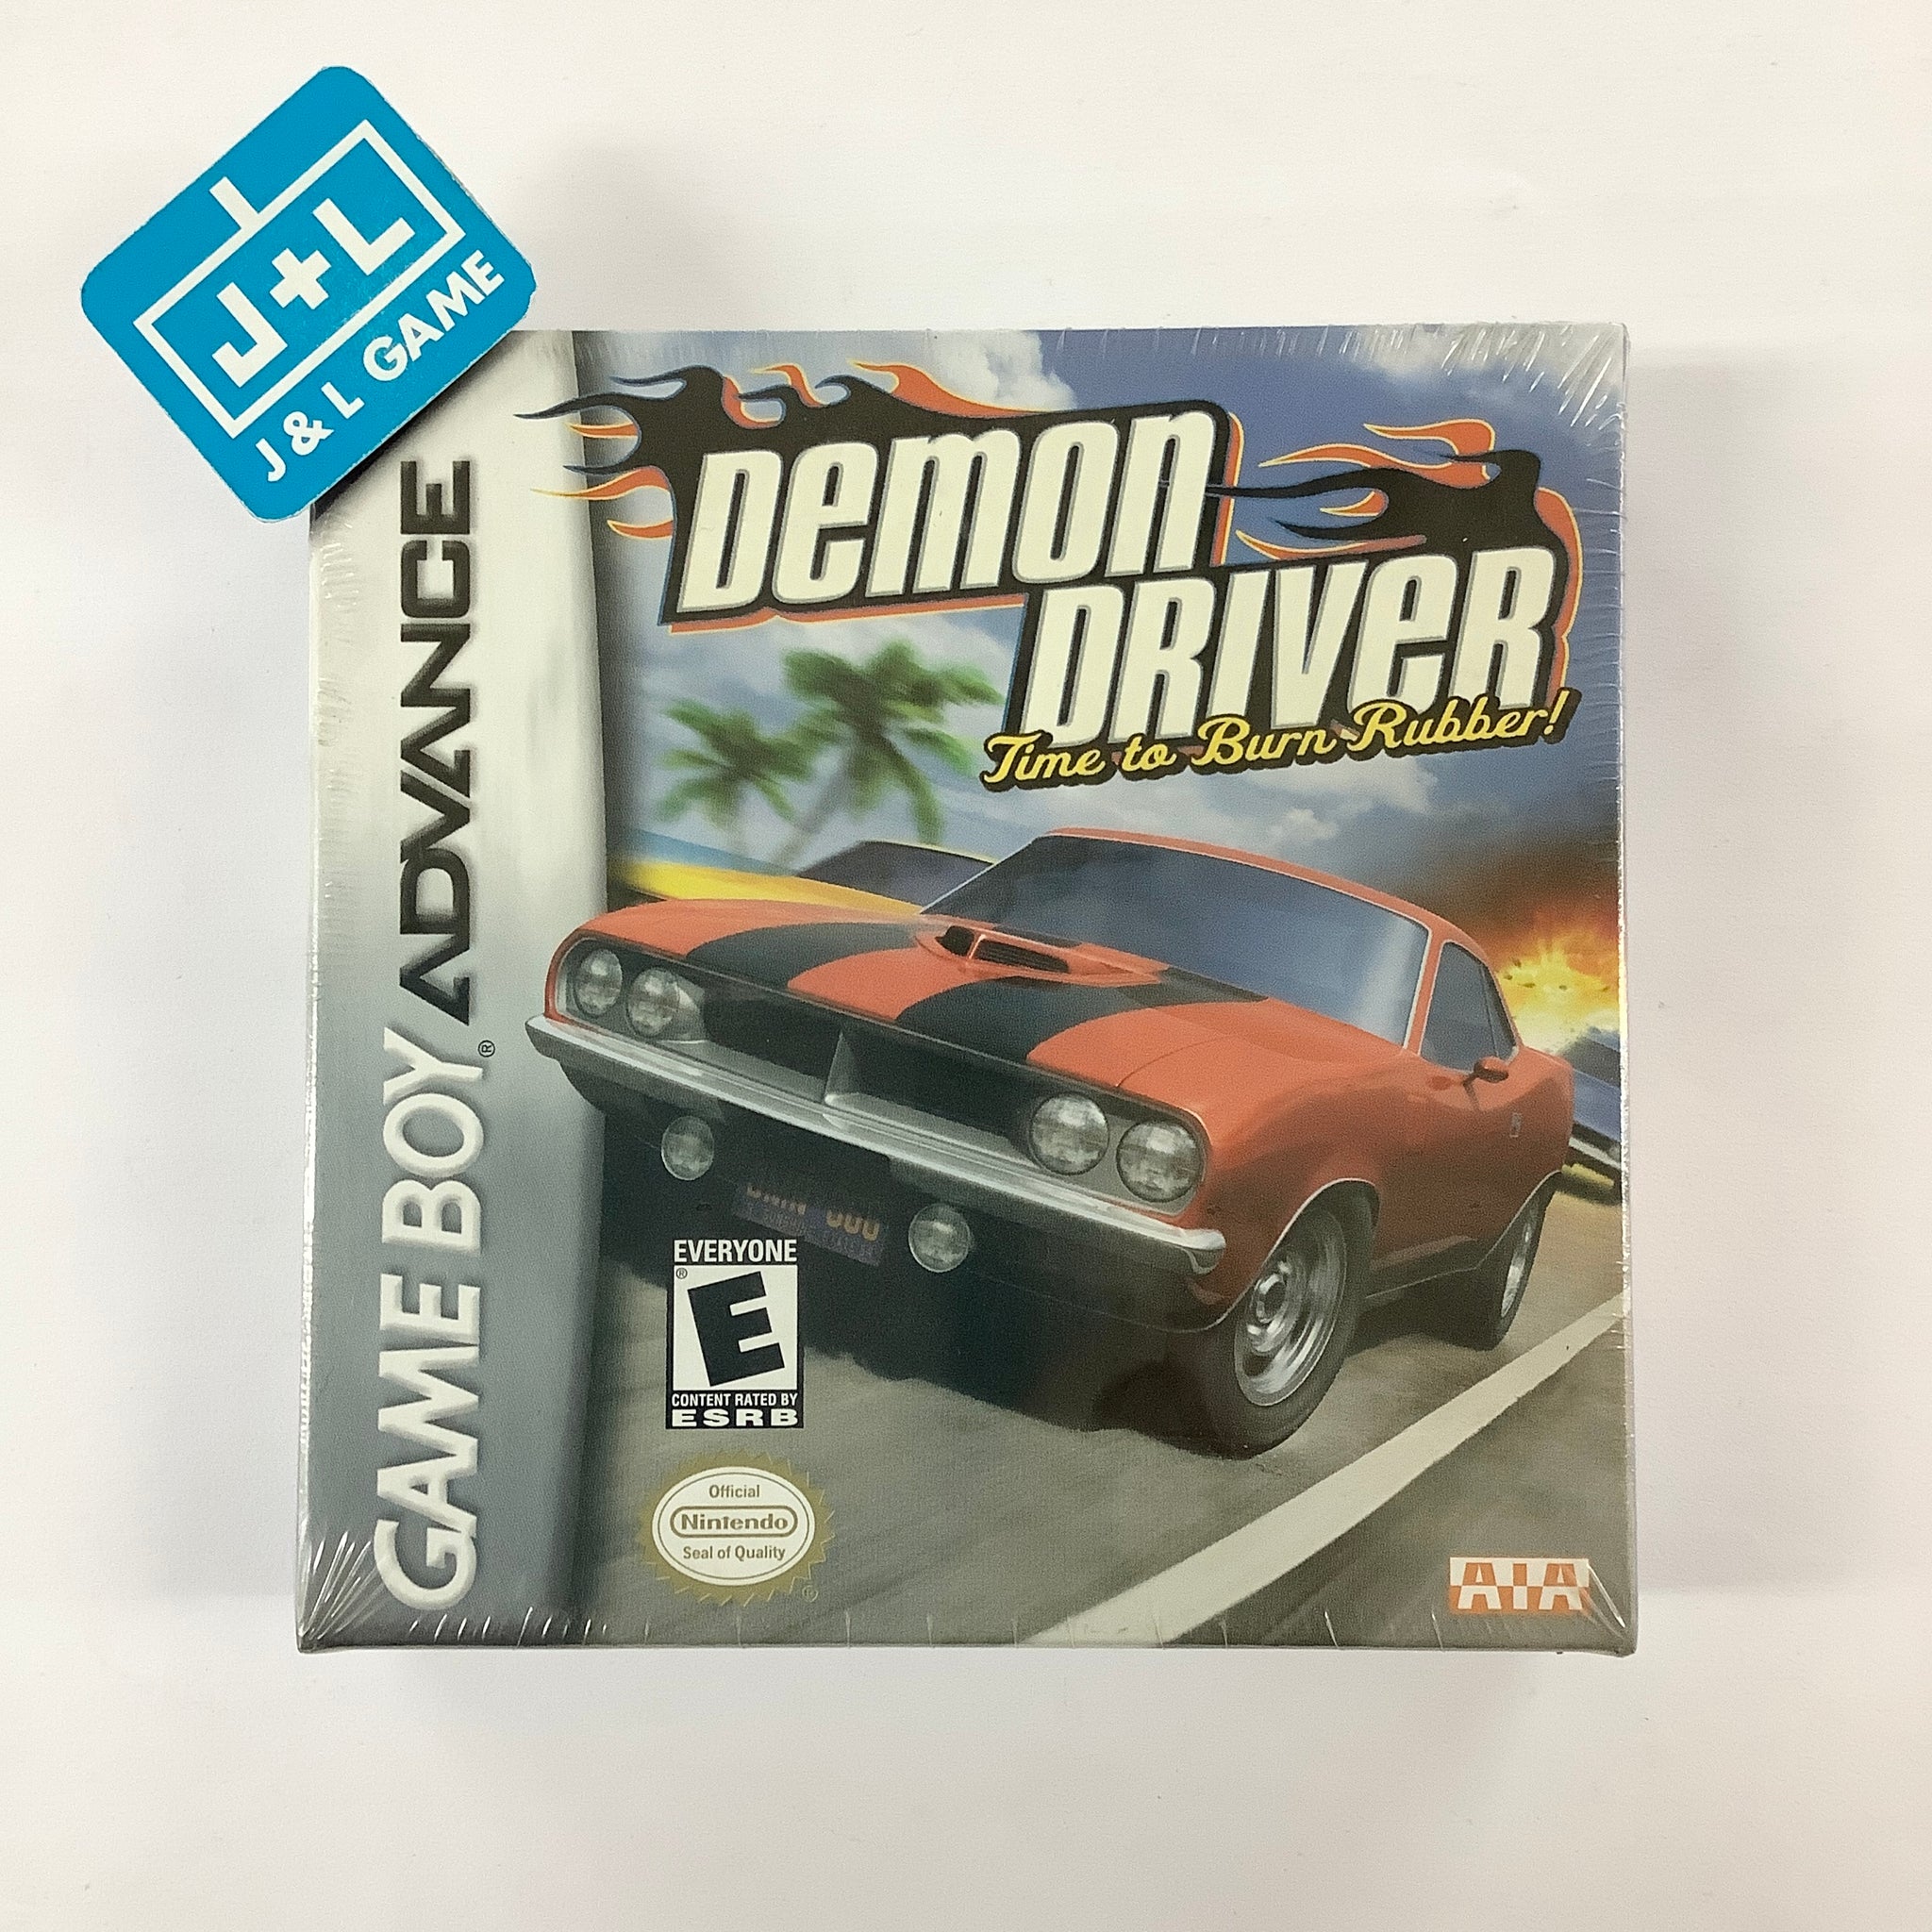 Demon Driver: Time to Burn Rubber - (GBA) Game Boy Advance Video Games Ignition Entertainment   